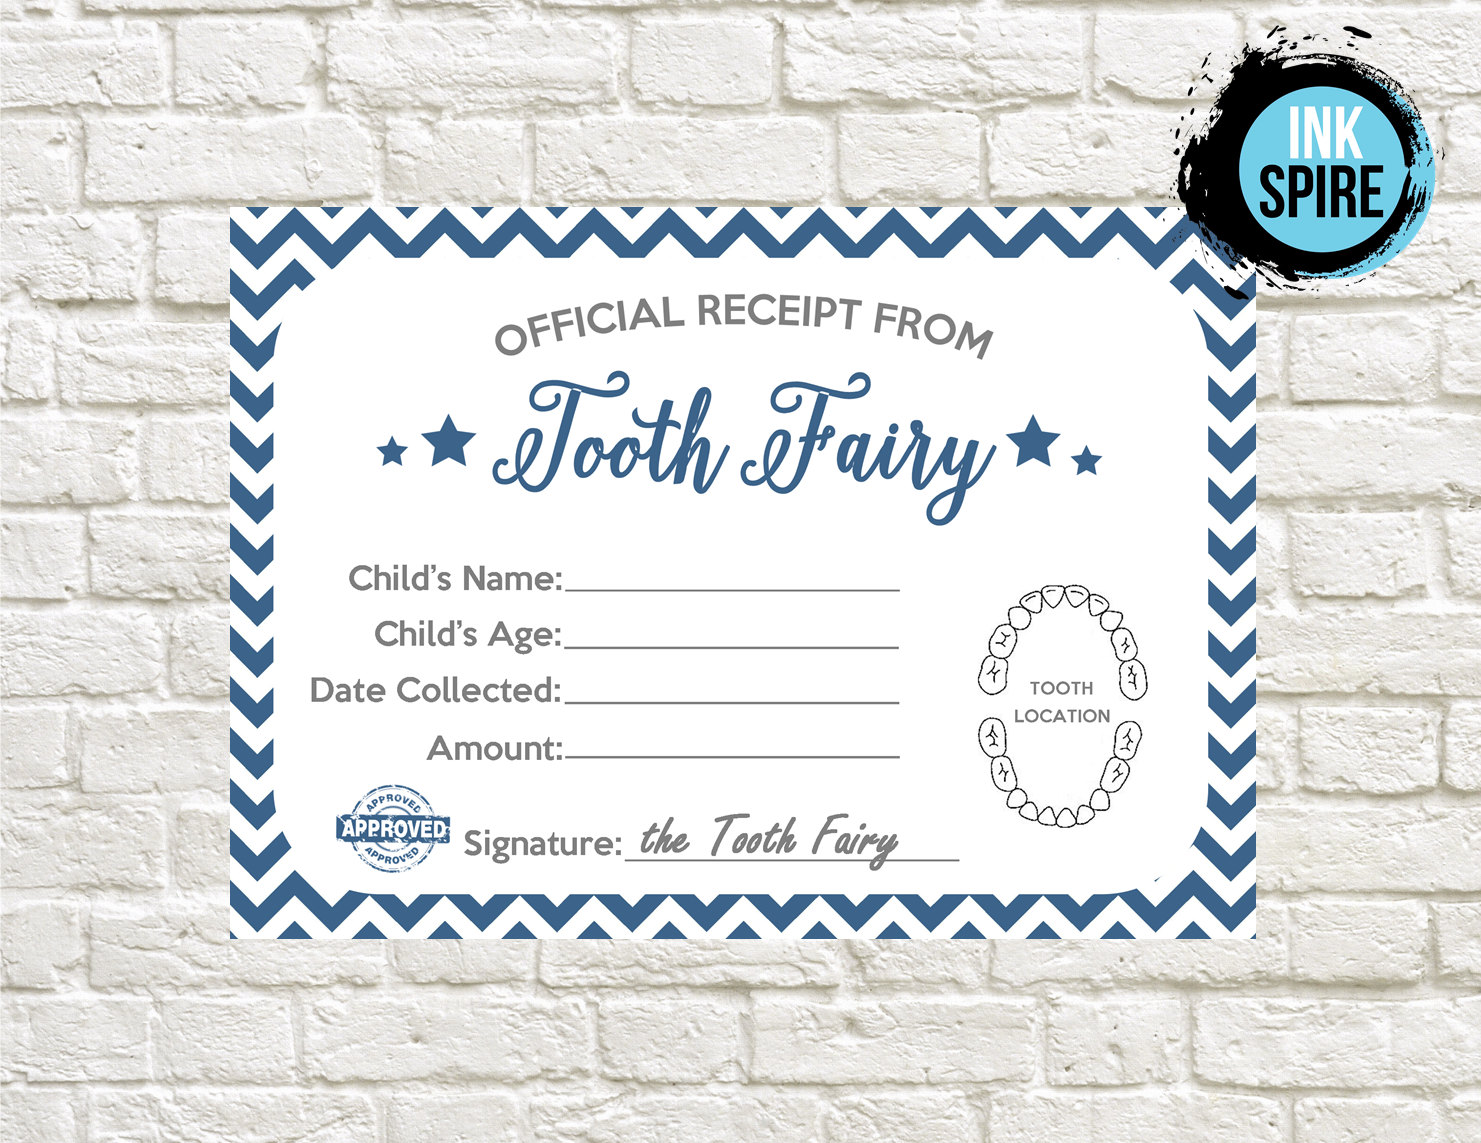 INSTANT DOWNLOAD / Tooth Fairy Receipt Printable / by beINKspired